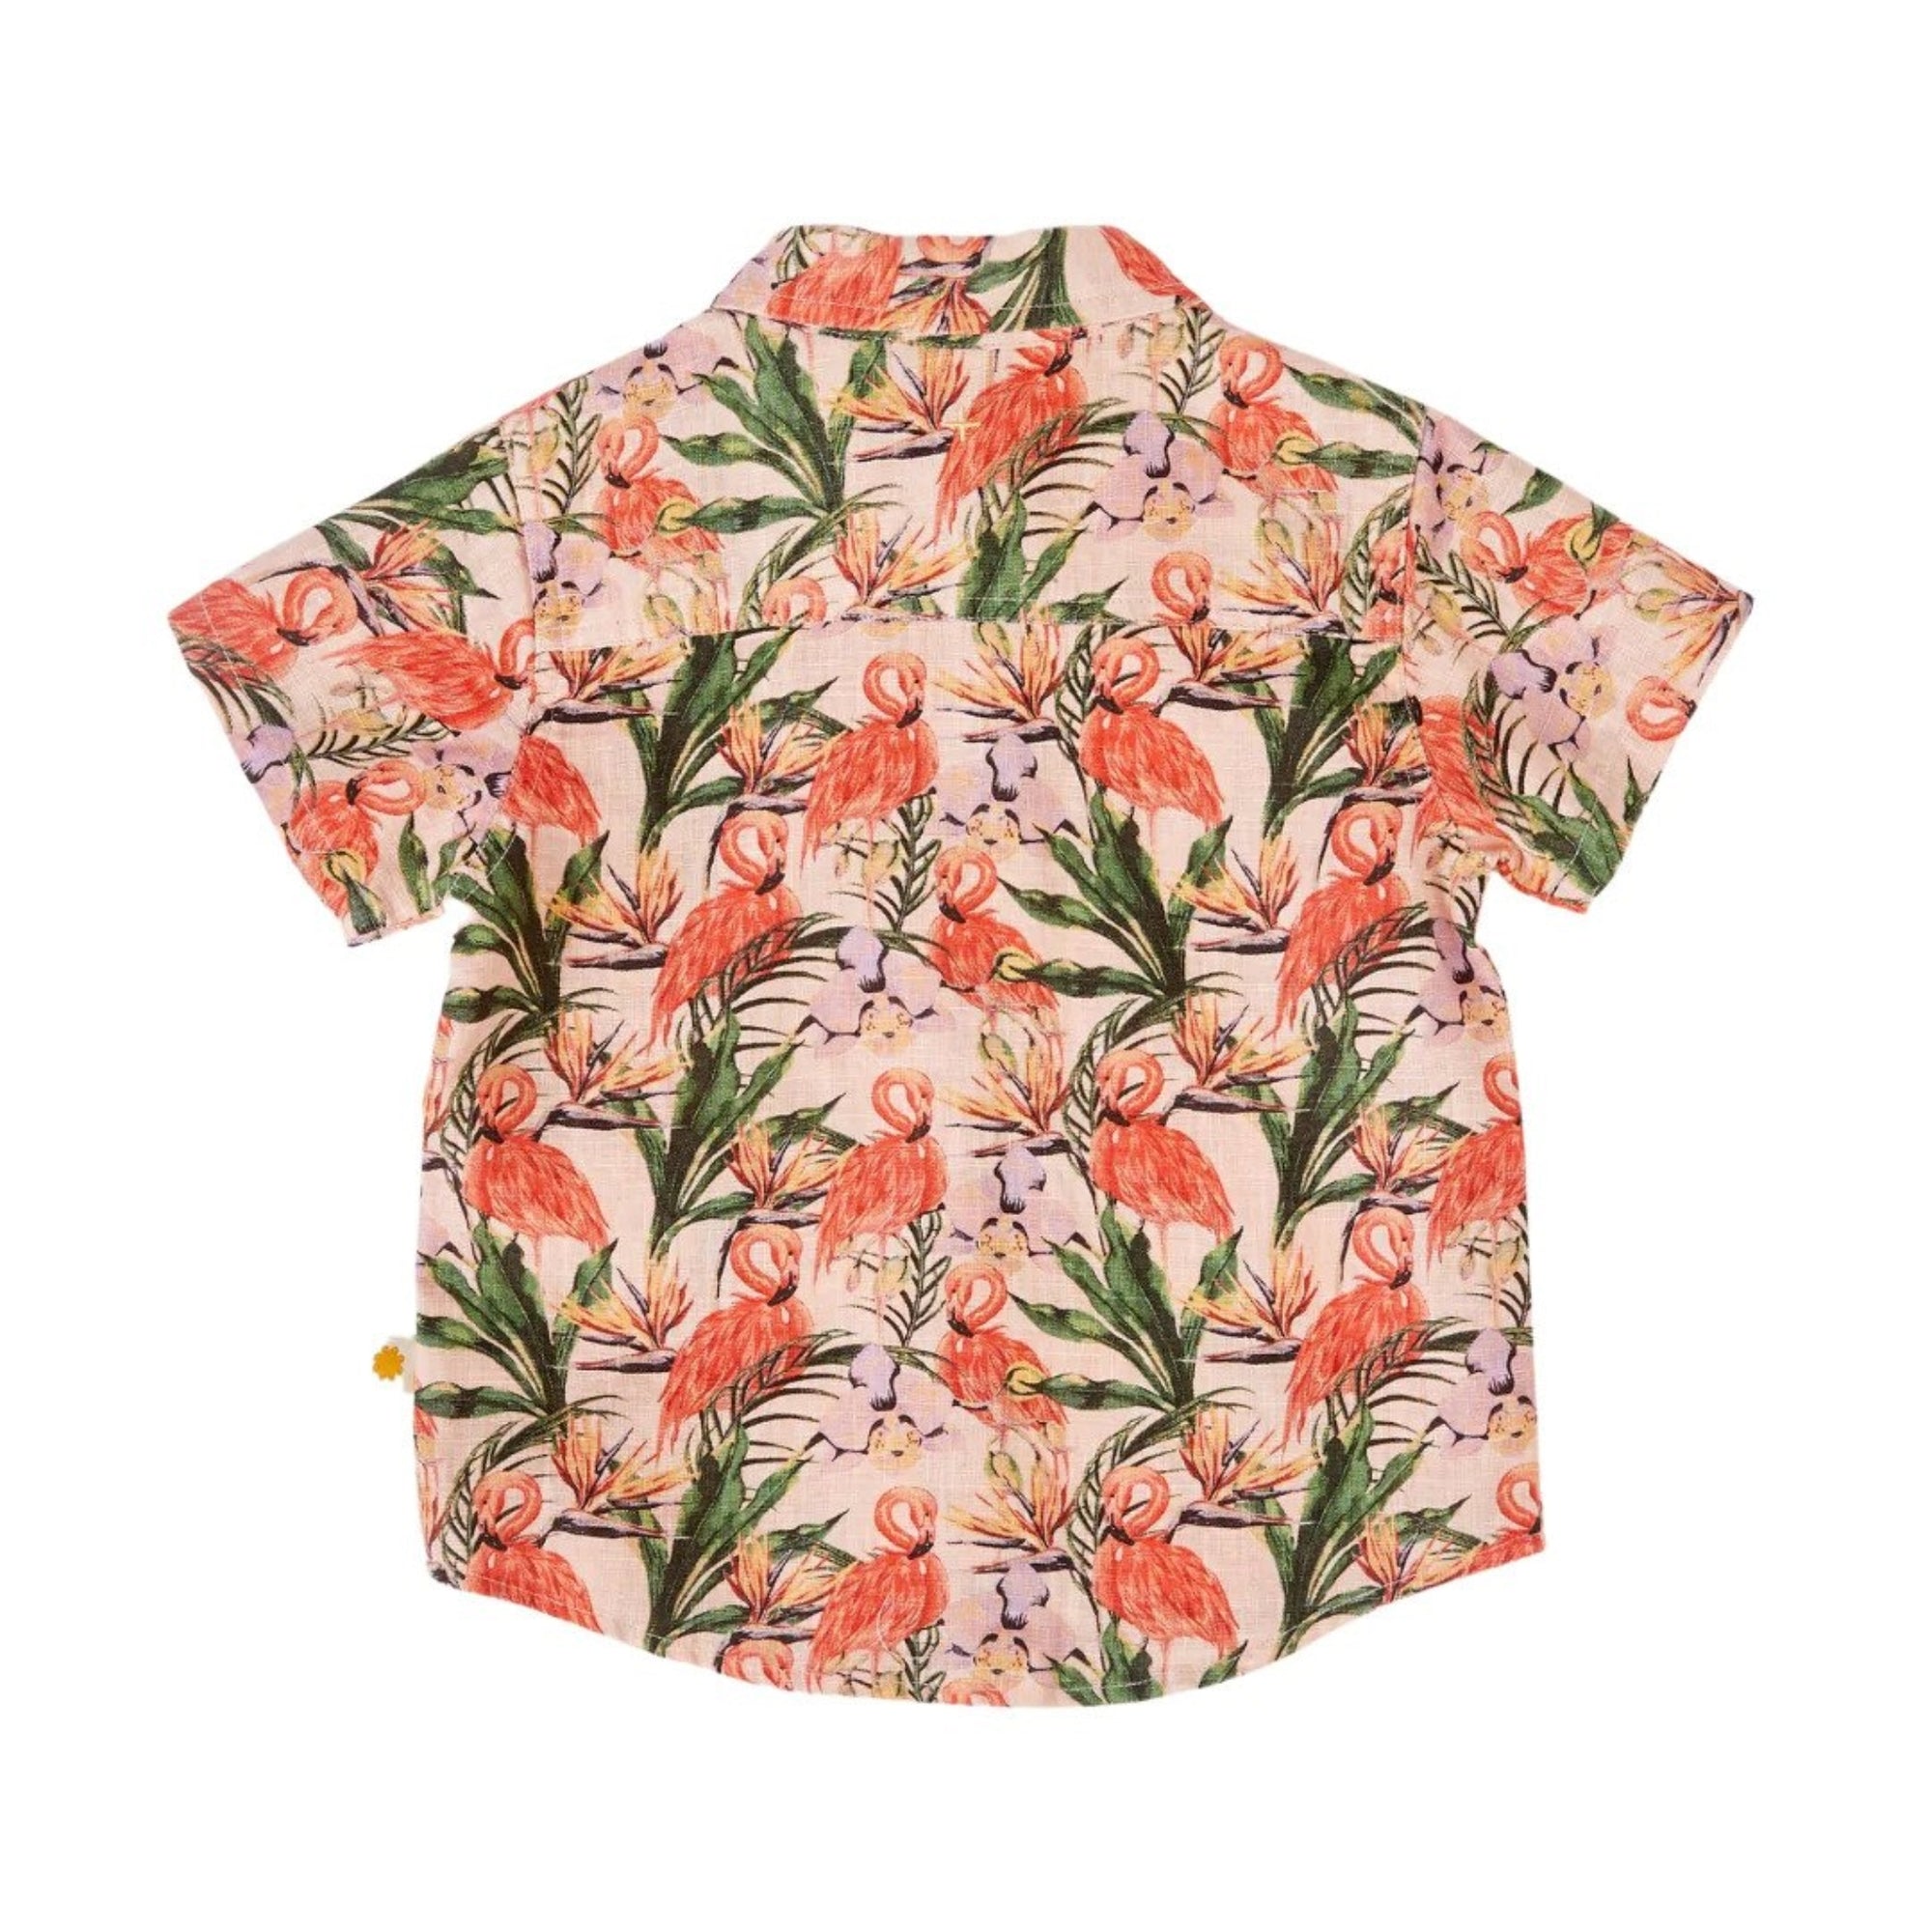 Goldie and Ace Holiday Linen Shirt - Flamingo Pink